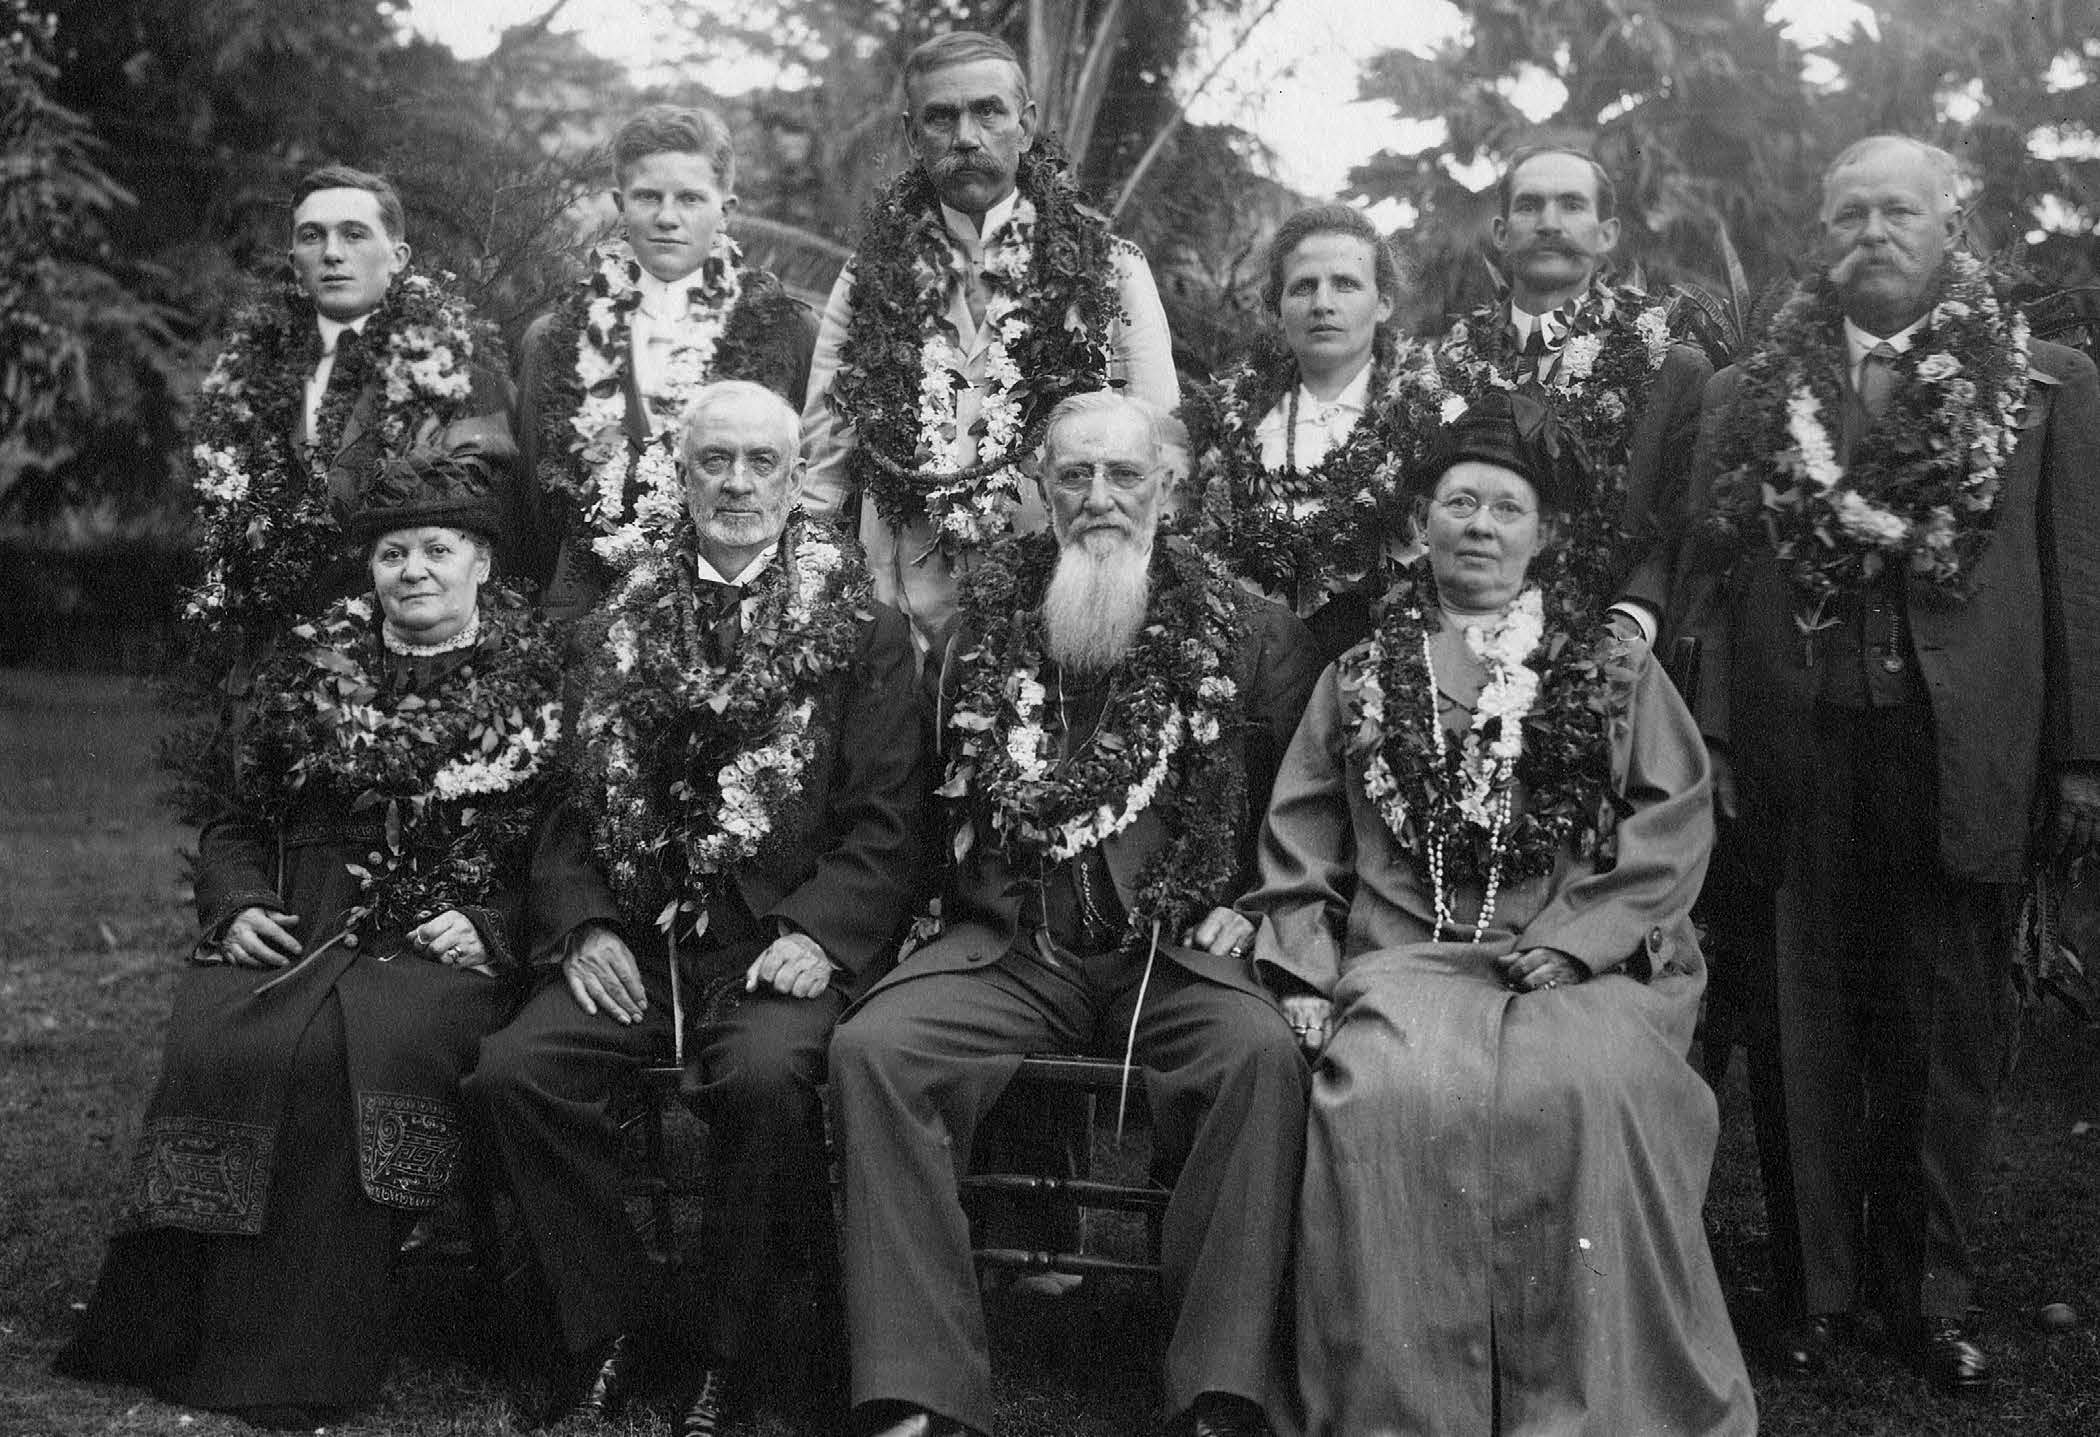 President Joseph F. Smith and his party in Honolulu on 21 May 1915. Front row, right to left: Julina and Joseph F. Smith; Charles W. Nibley and his wife Rebecca. Back row, right to left: Mission president Samuel E. Woolley, Honolulu District leader Earnest L. and his wife Theresa Minor, Elder Reed Smoot, and missionaries. Courtesy of Church History Library.